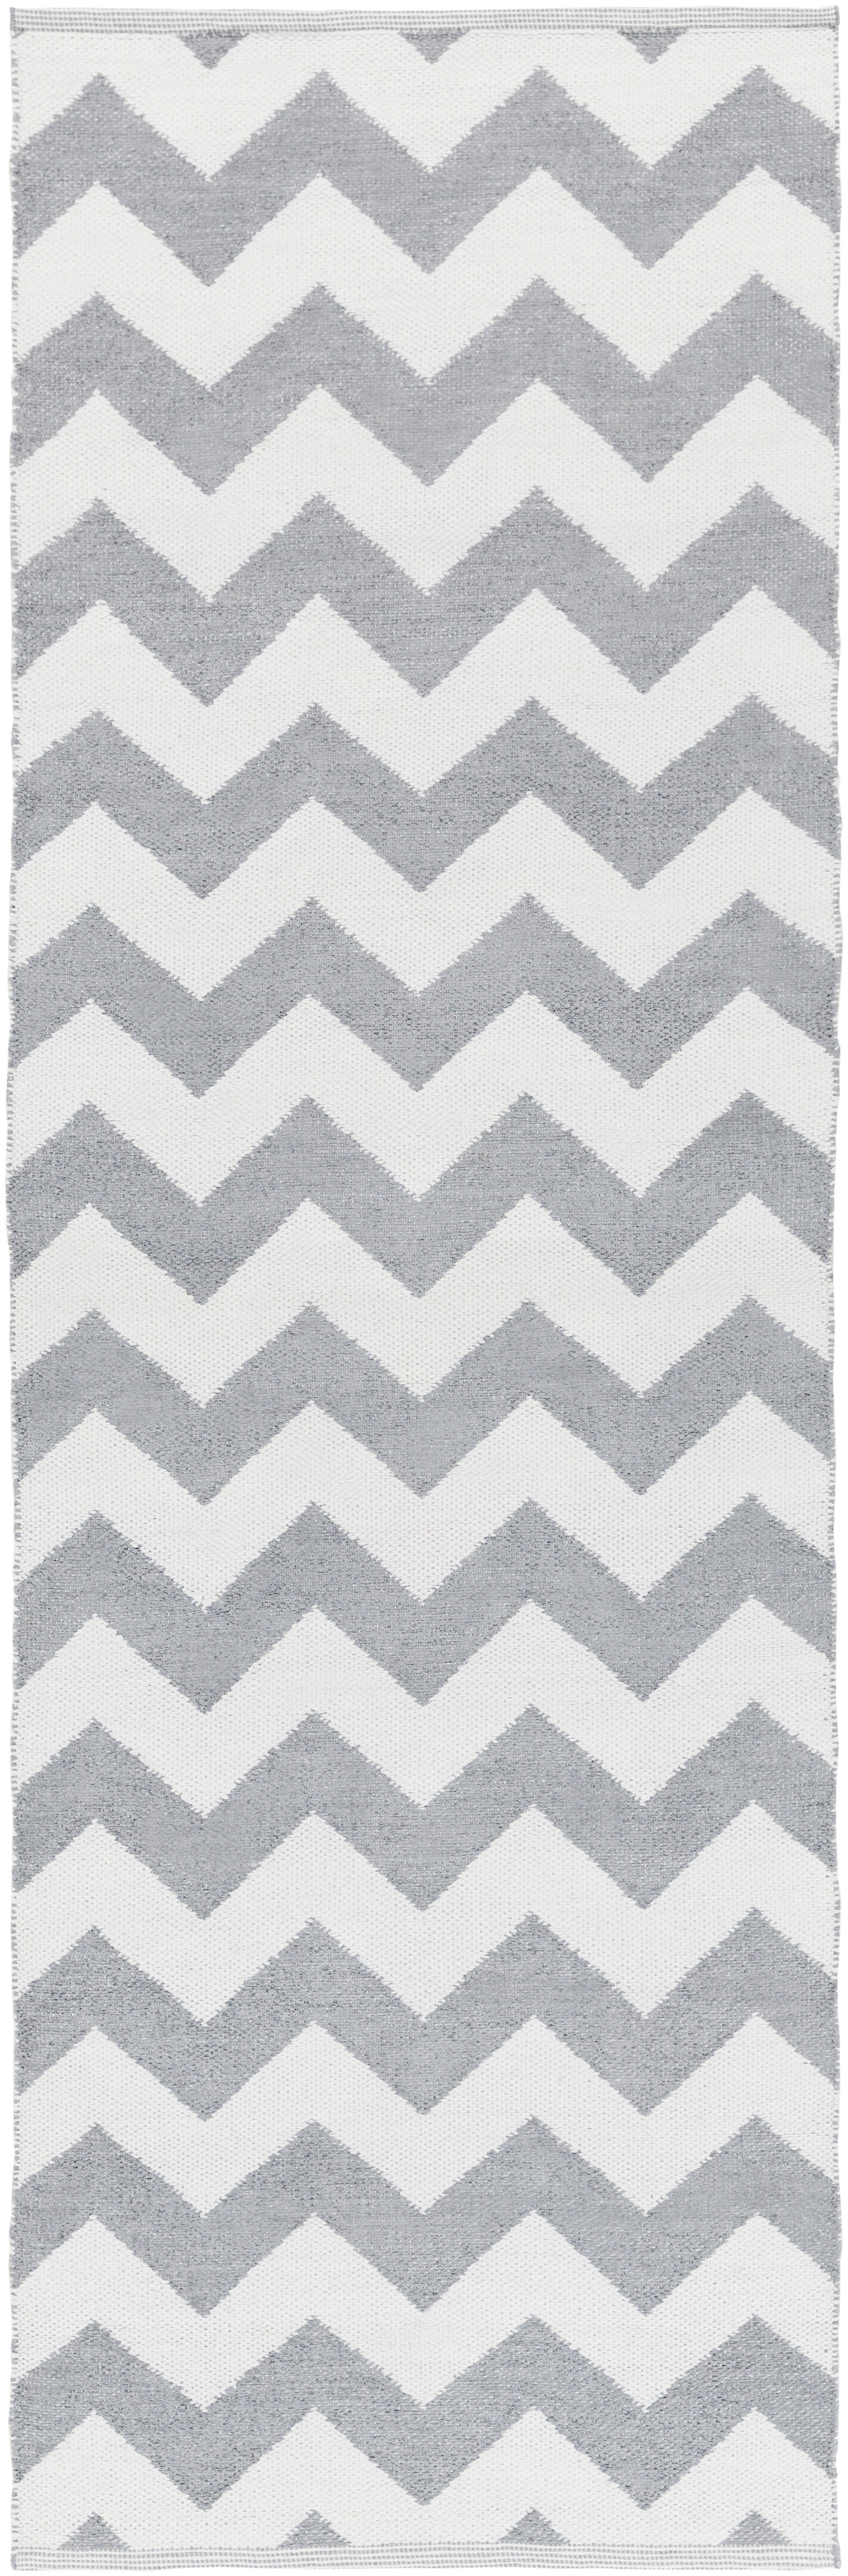 Surya Picnic PIC4008 Grey/White Outdoor Area Rug